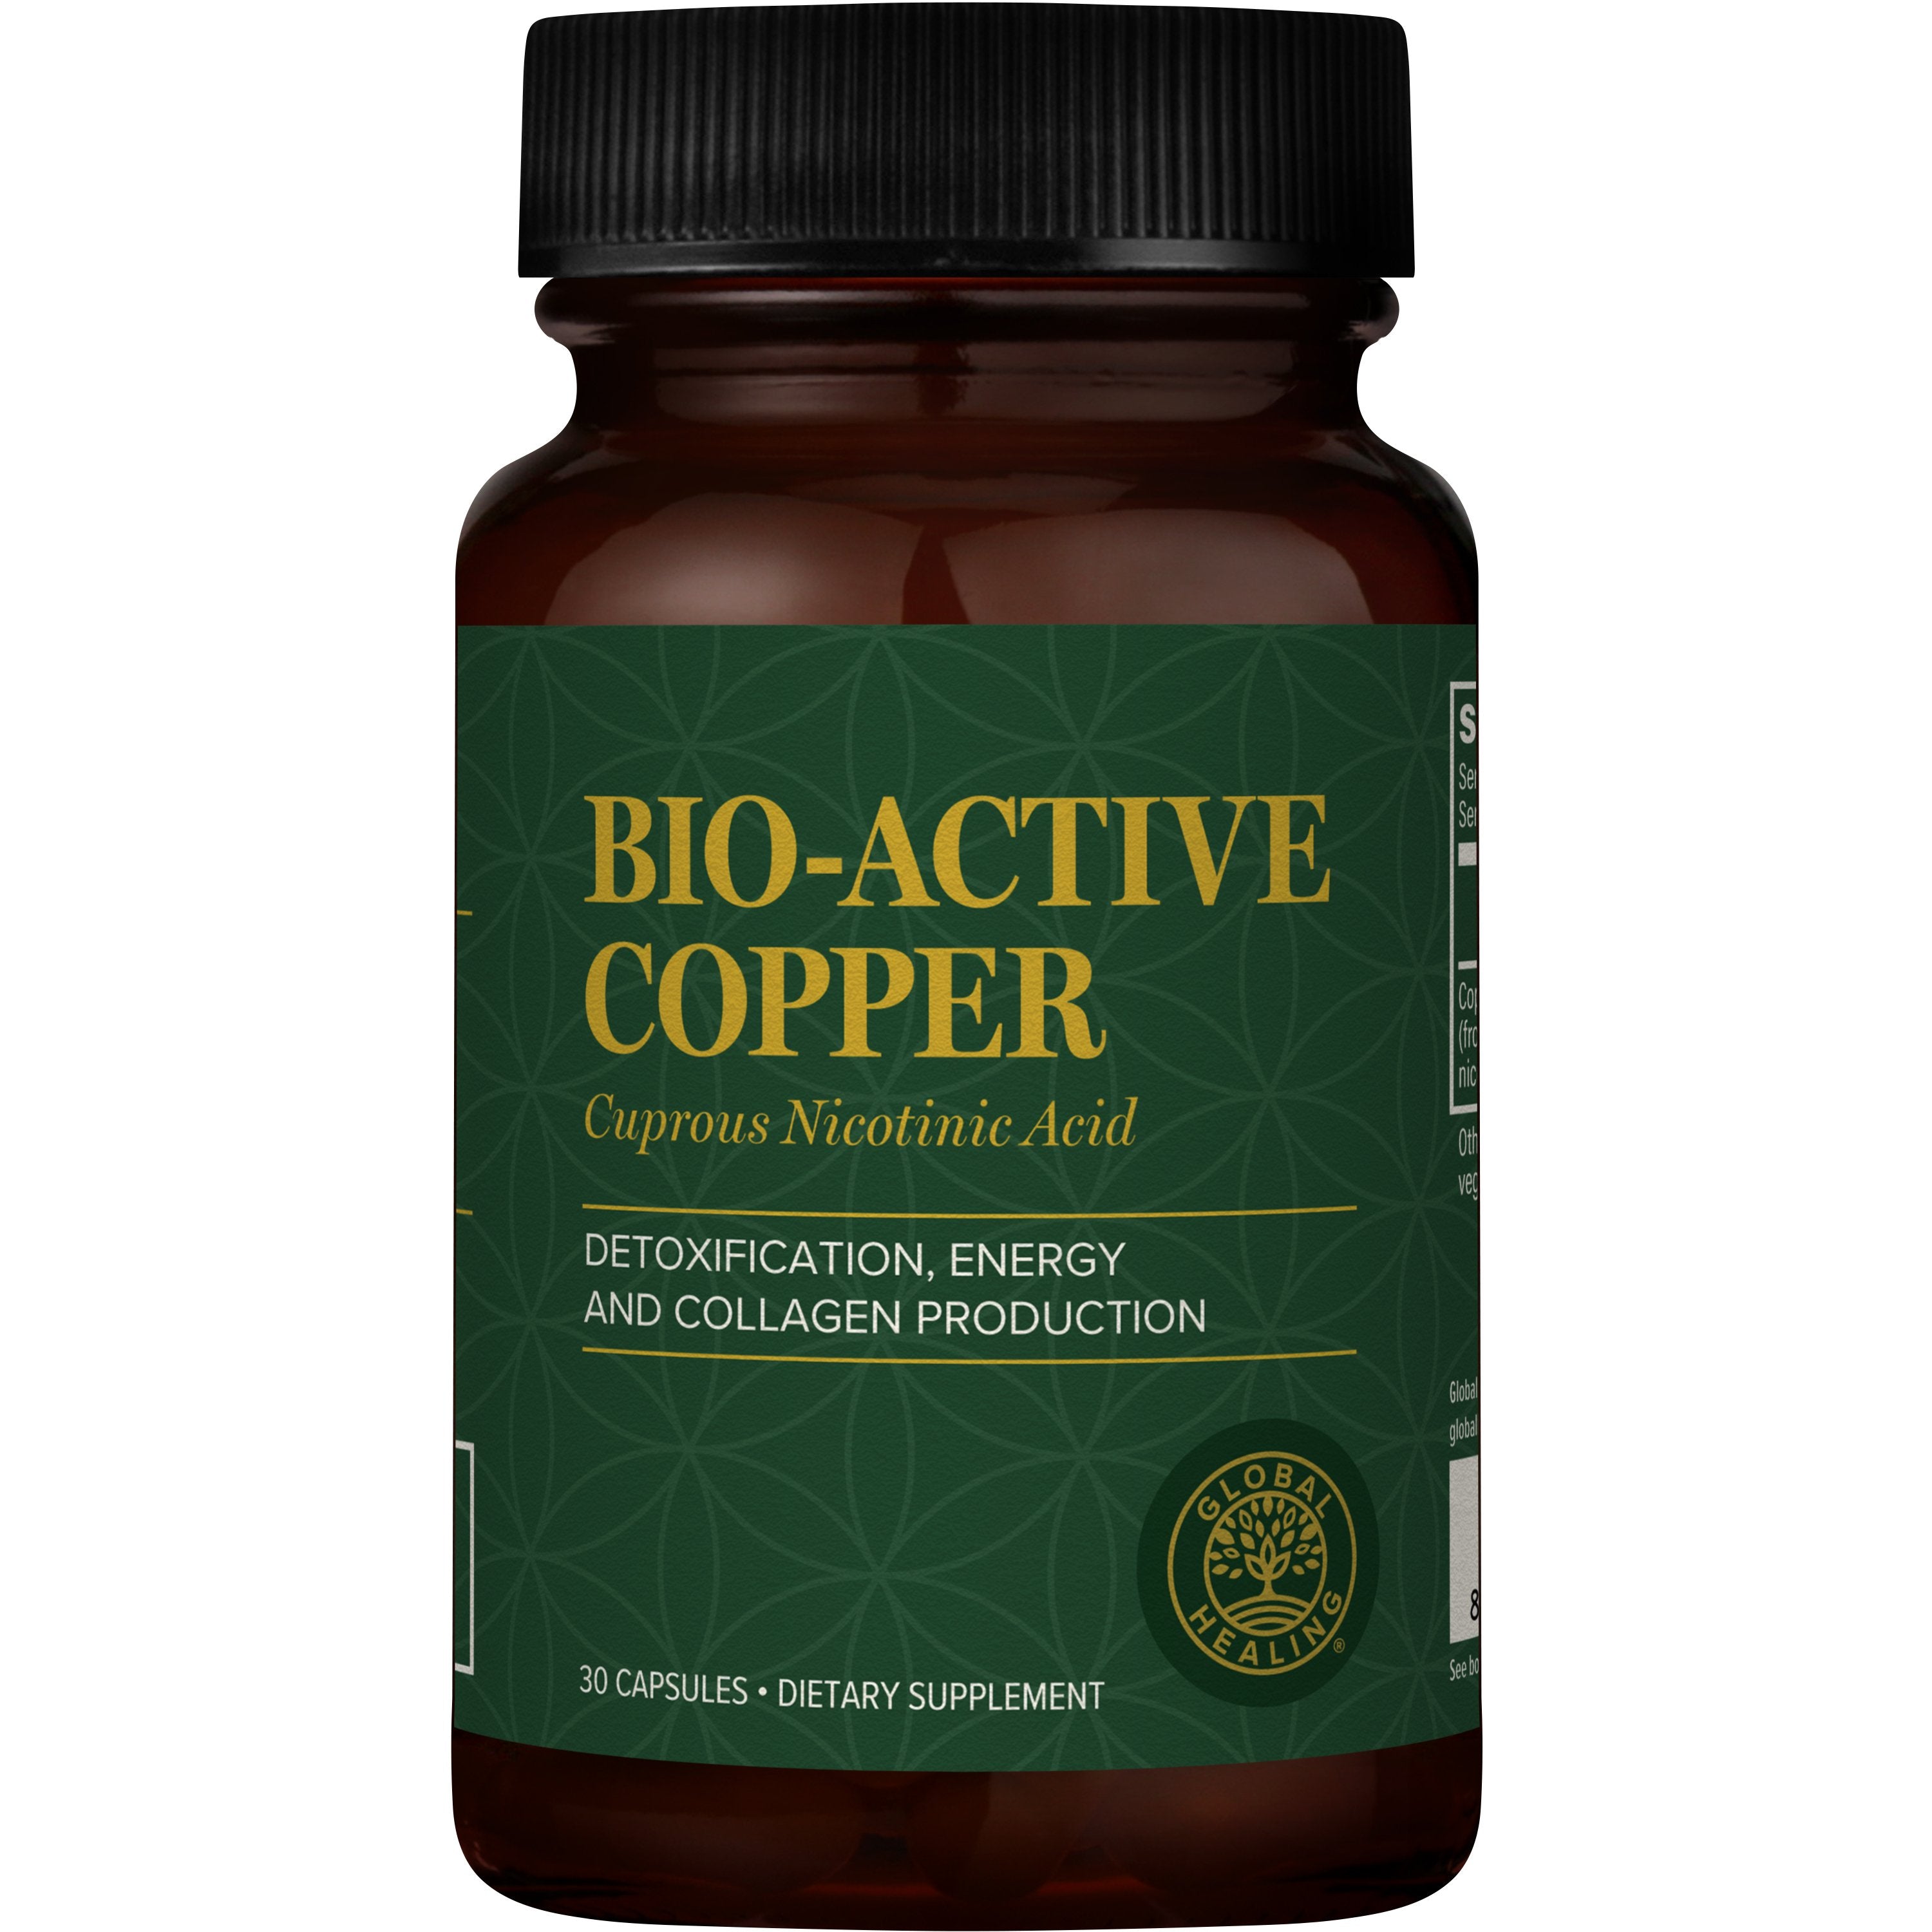 A bottle of Global Healing's Bio-Active Copper, previously known as CU1 and formulated with Cuprous Nicotinic Acid.